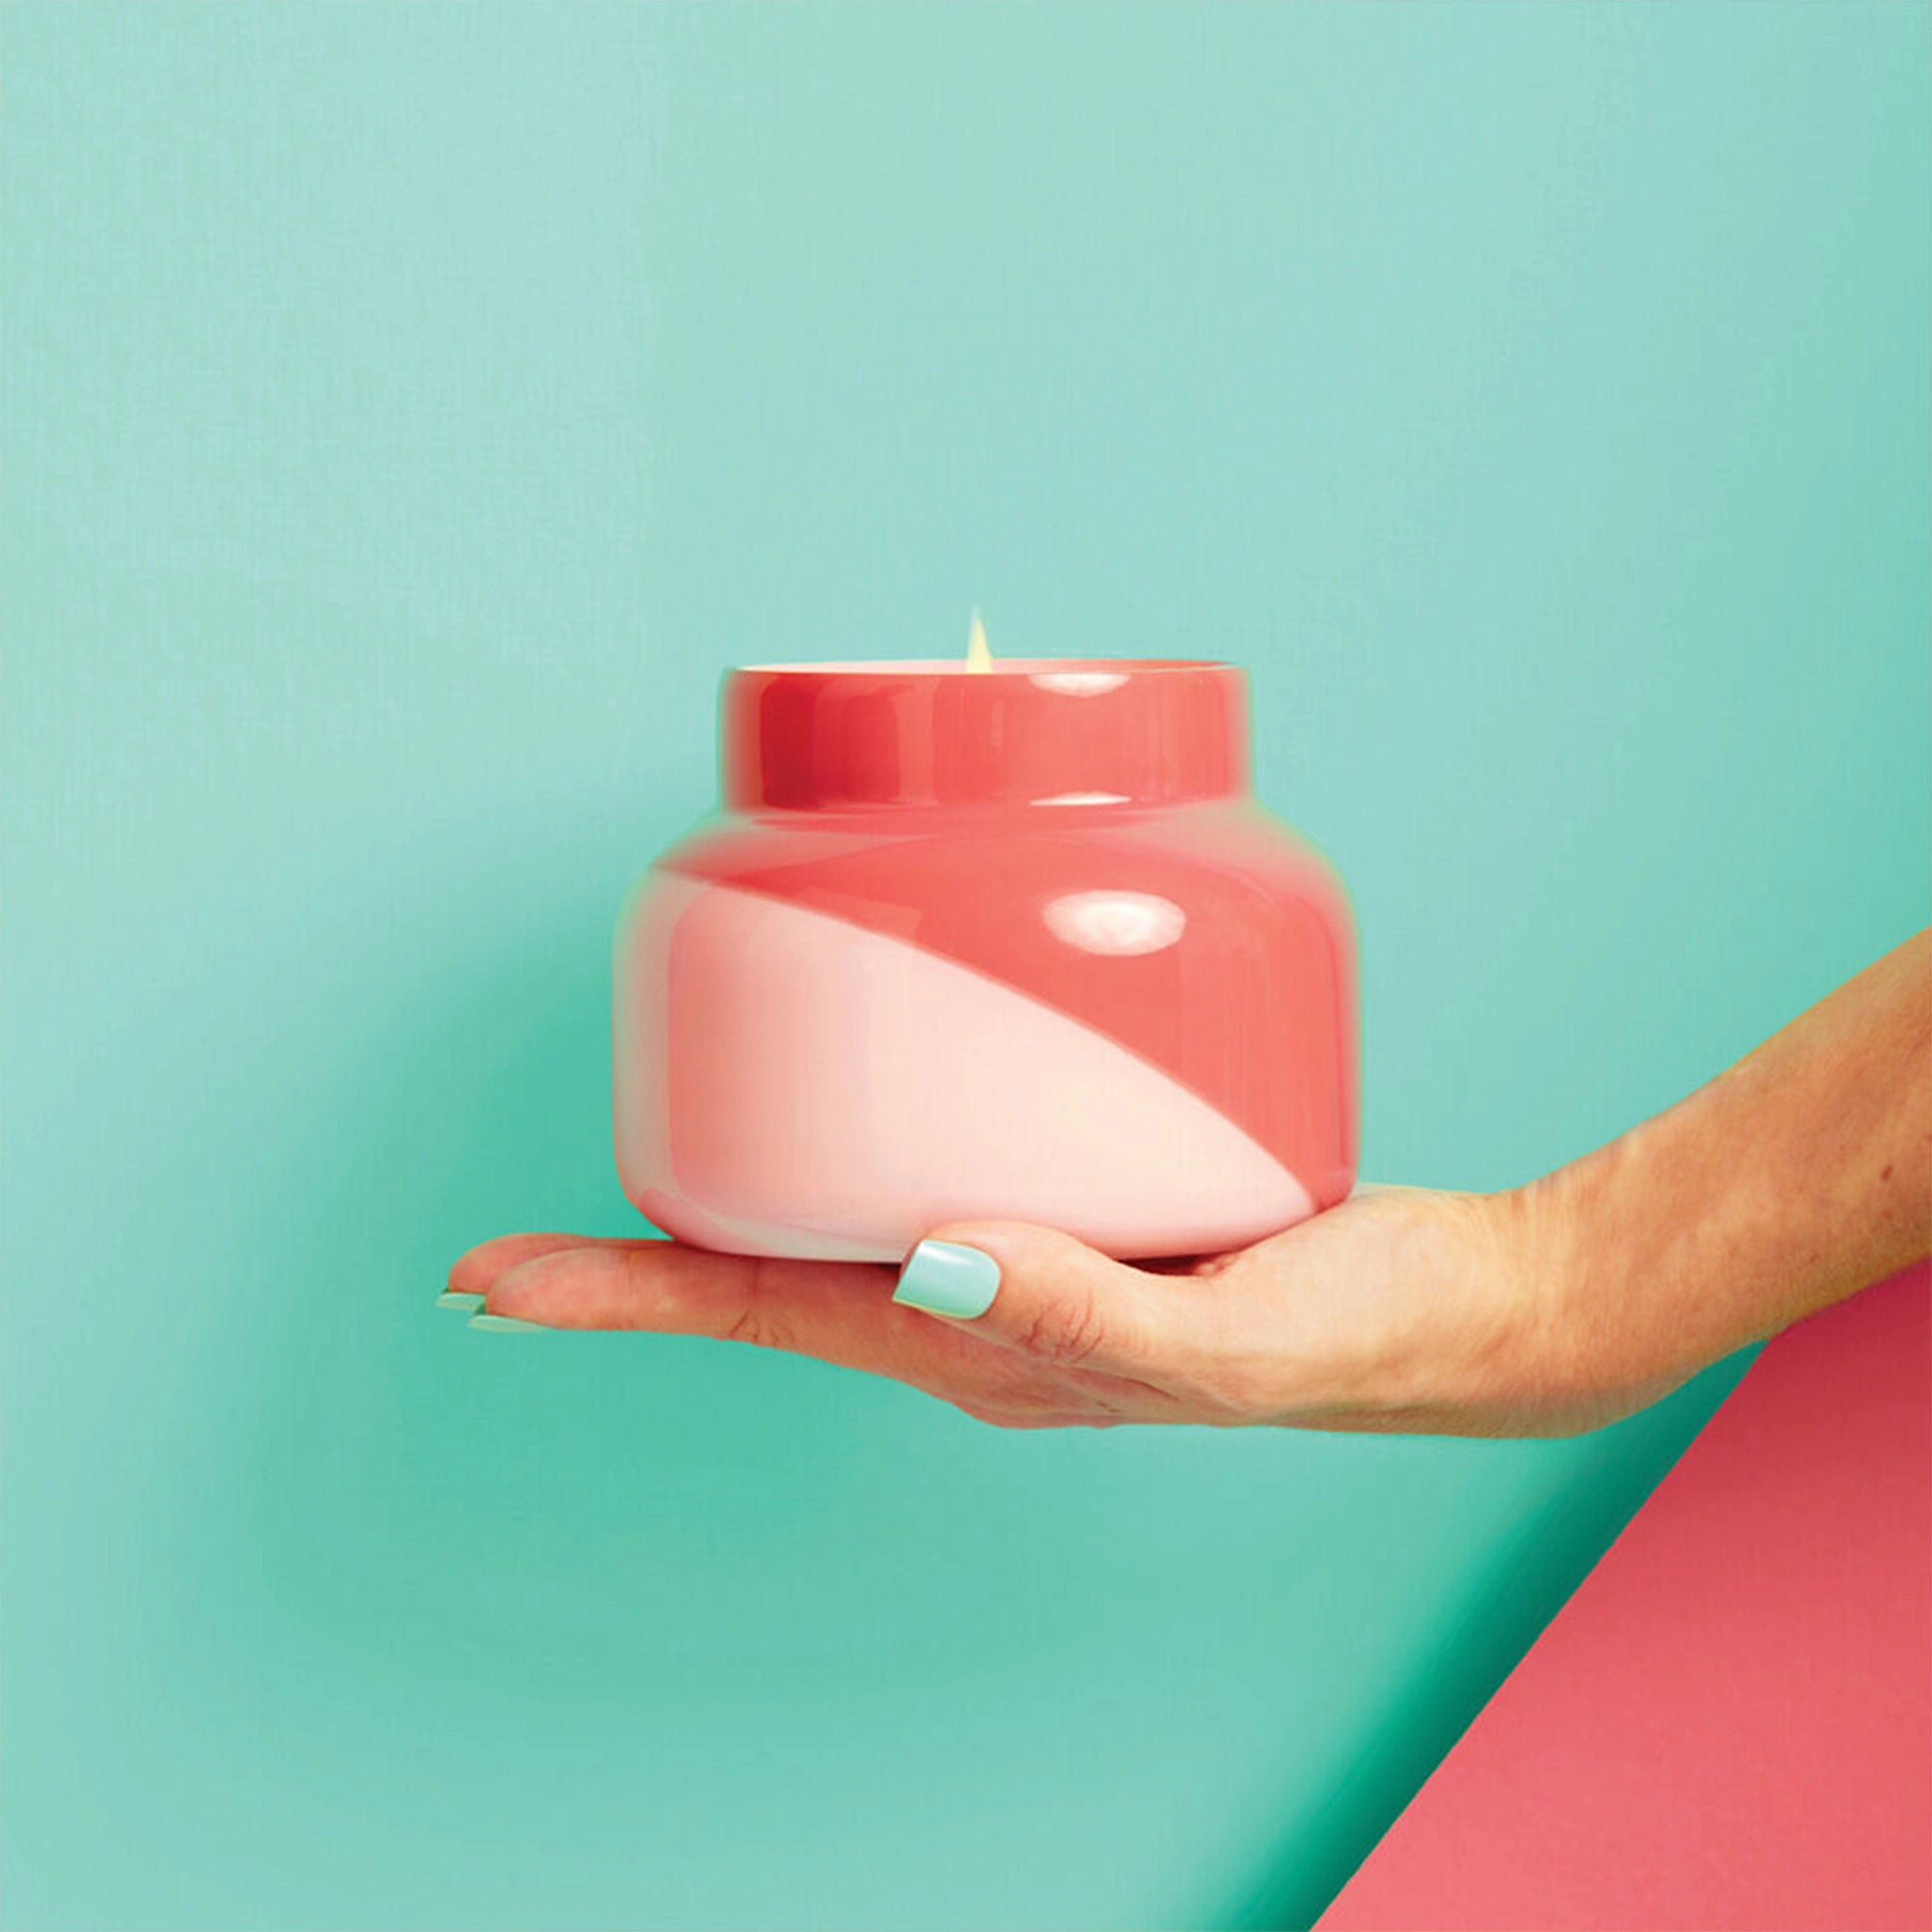 A glass candle jar with a two toned design featuring a light pink and a darker pink that is split diagonally and held in a models hand in front of a teal background.